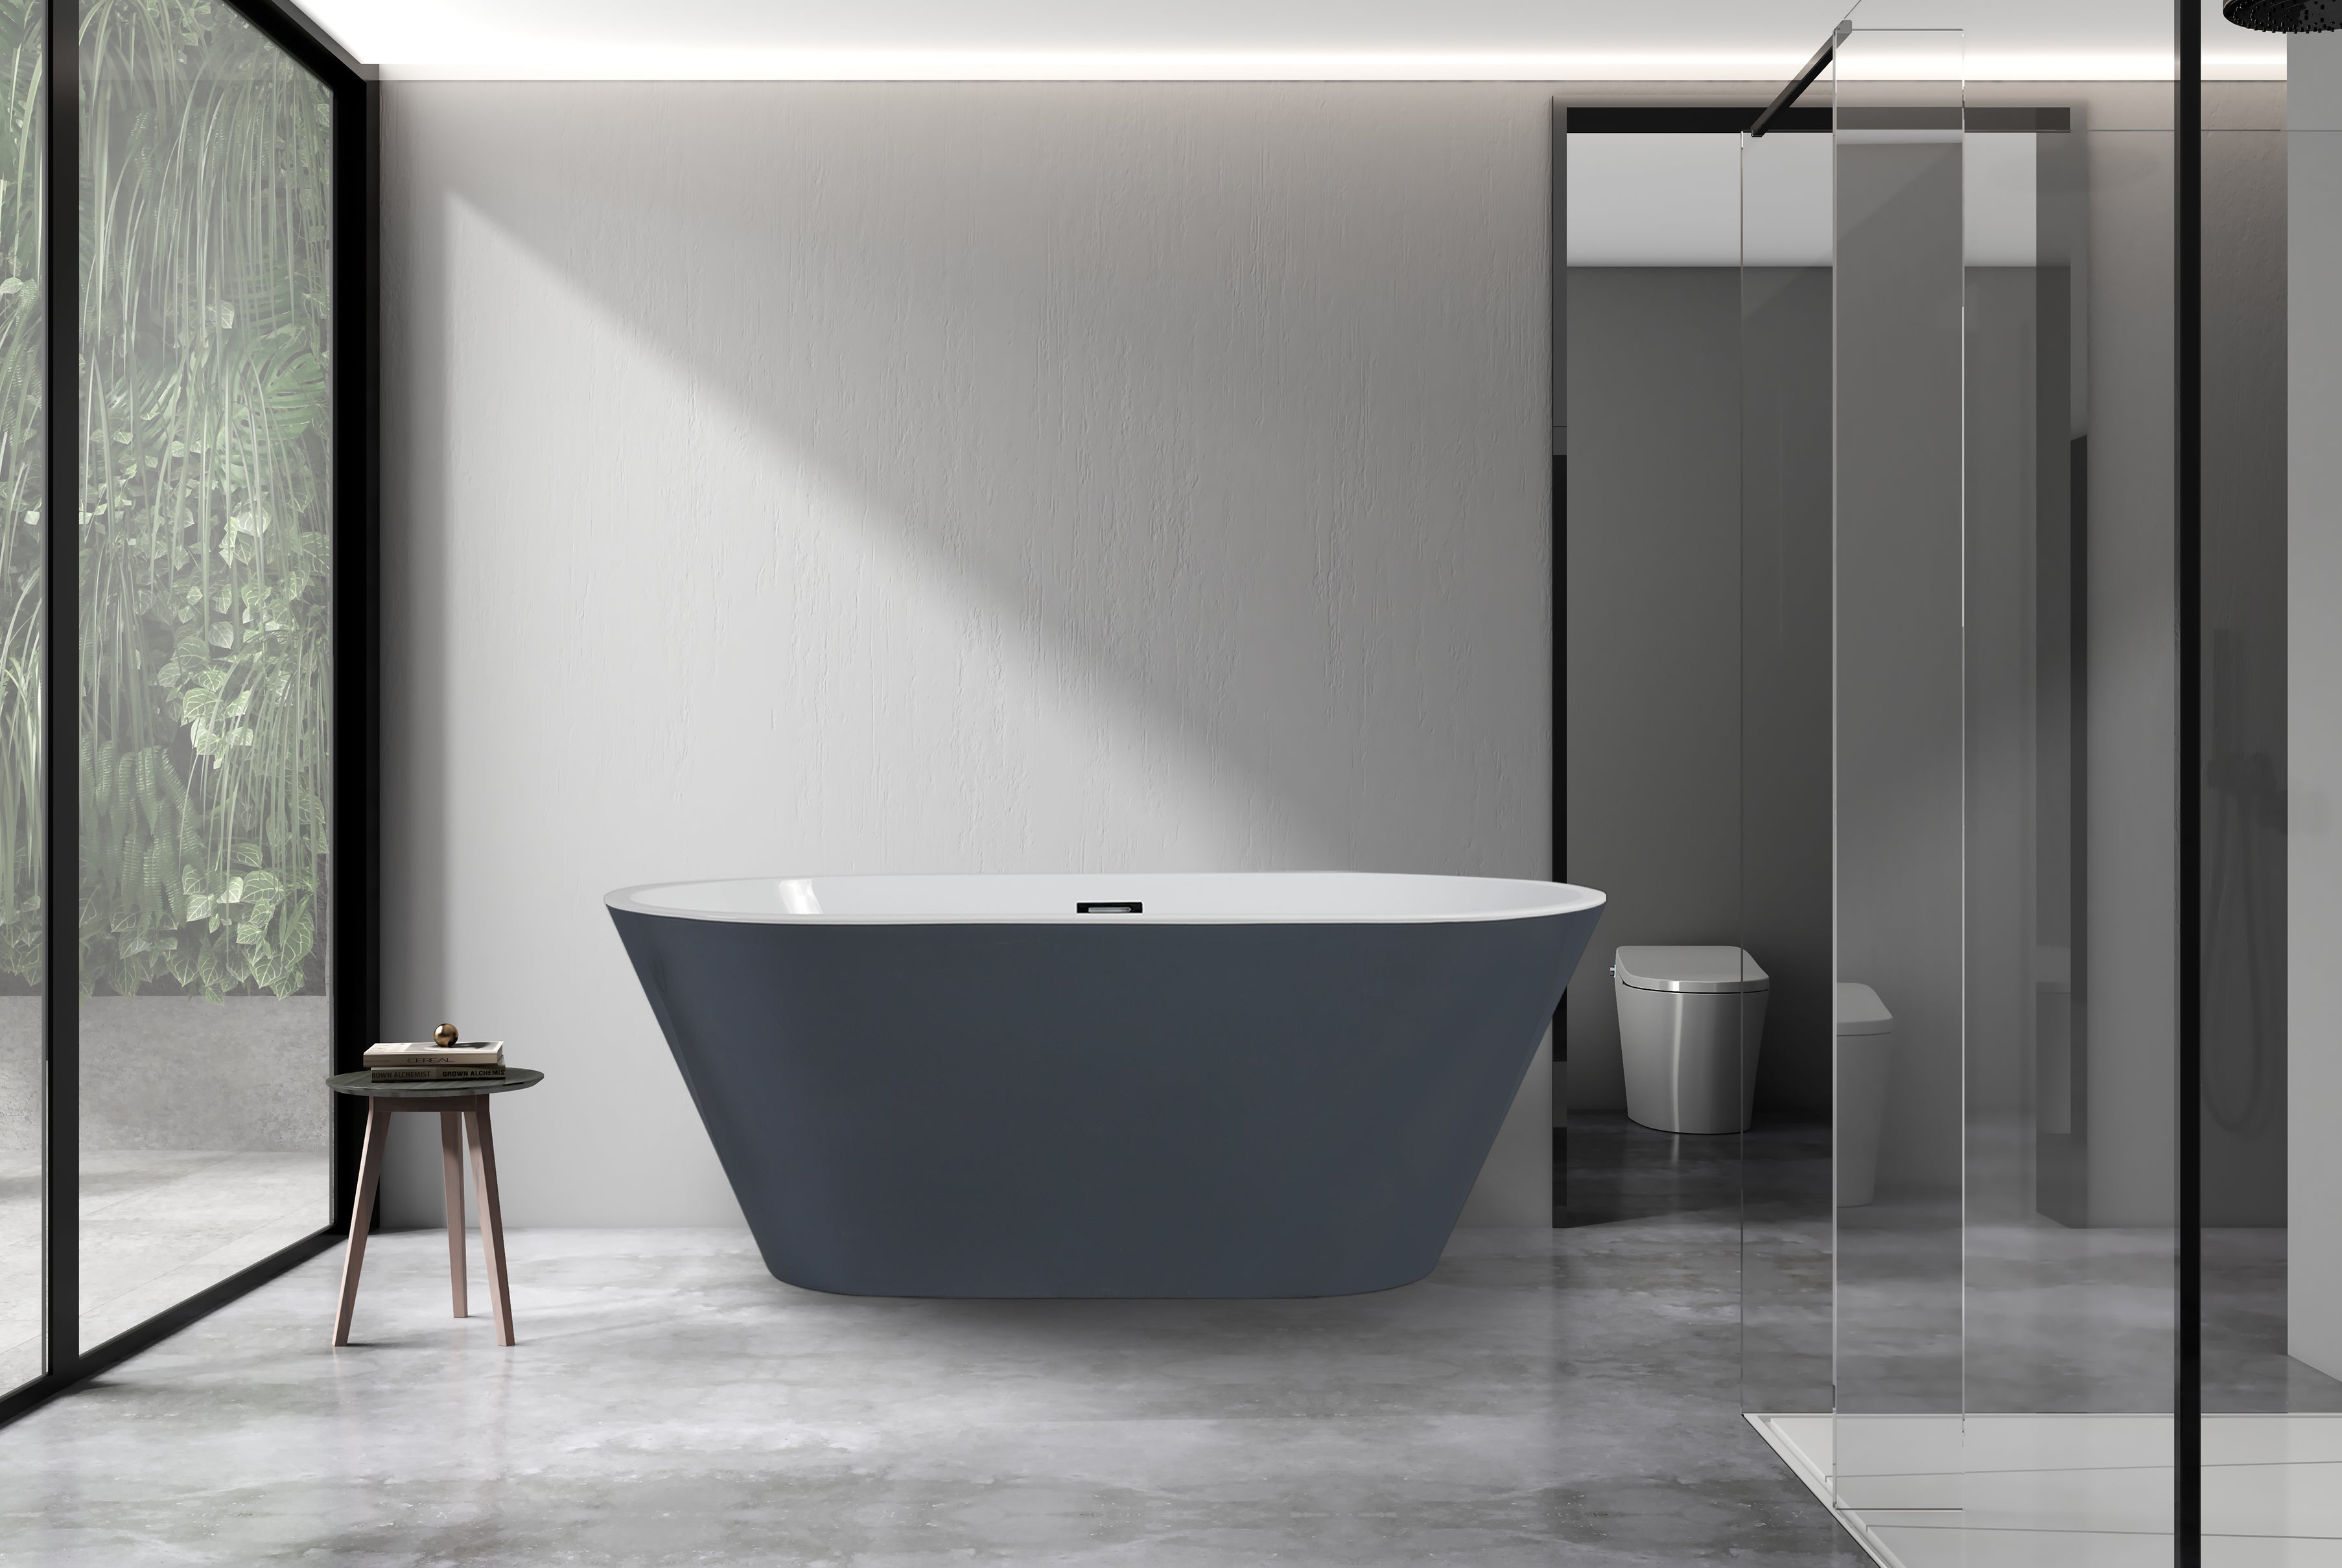 SkySea Bath Tub 59 White Outsid and Grey Exterior Free Standing Soaker, Center Drain And Overflow